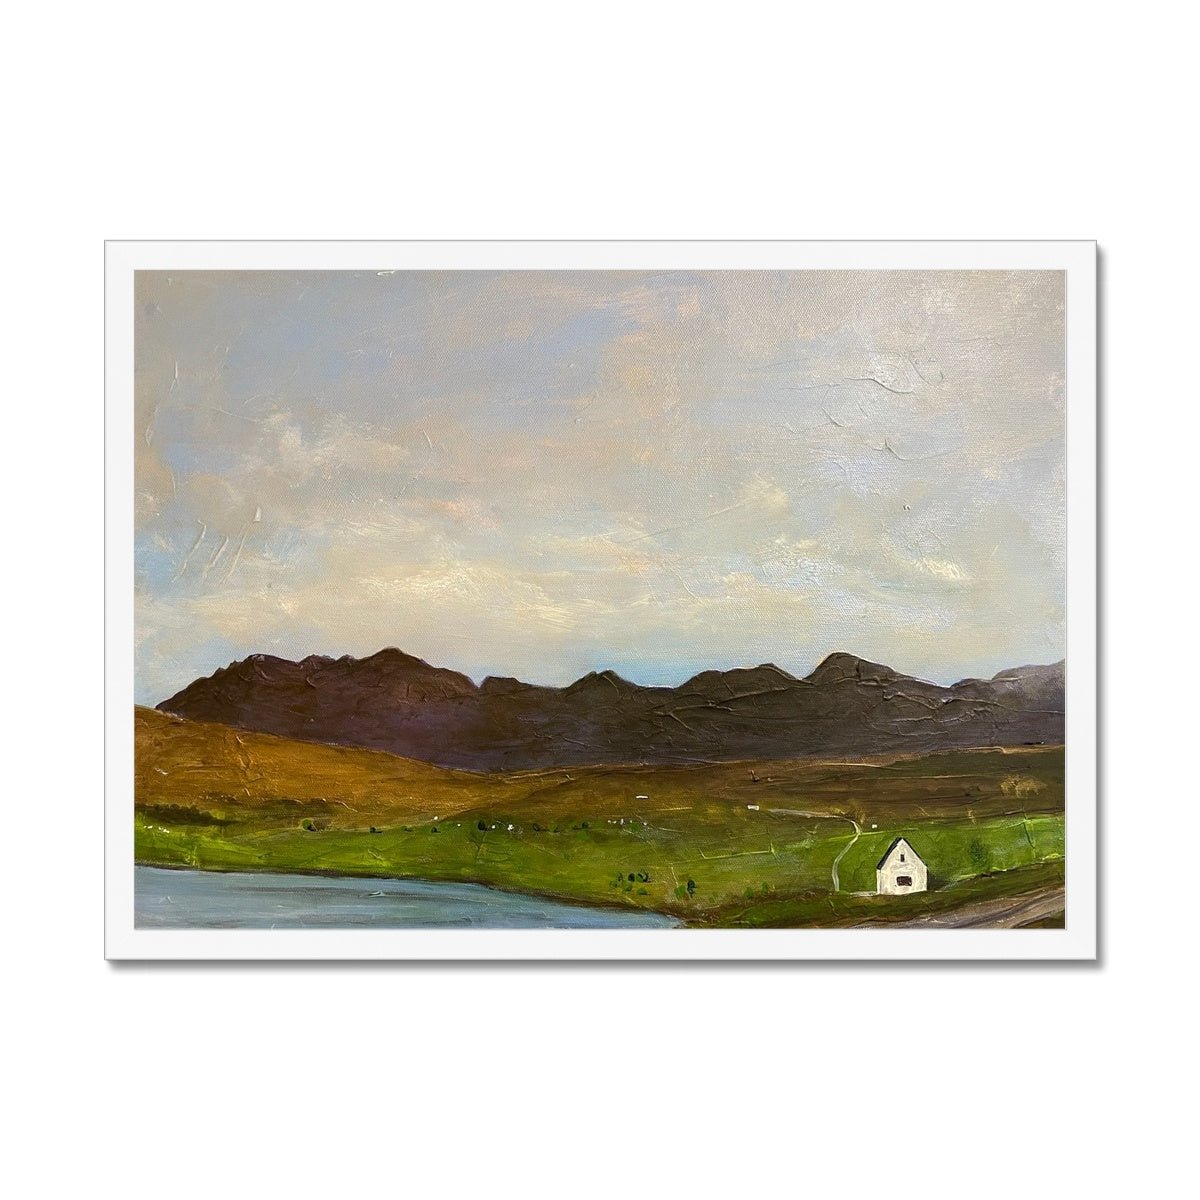 The Road To Carbost Skye Painting | Framed Prints From Scotland-Framed Prints-Skye Art Gallery-A2 Landscape-White Frame-Paintings, Prints, Homeware, Art Gifts From Scotland By Scottish Artist Kevin Hunter